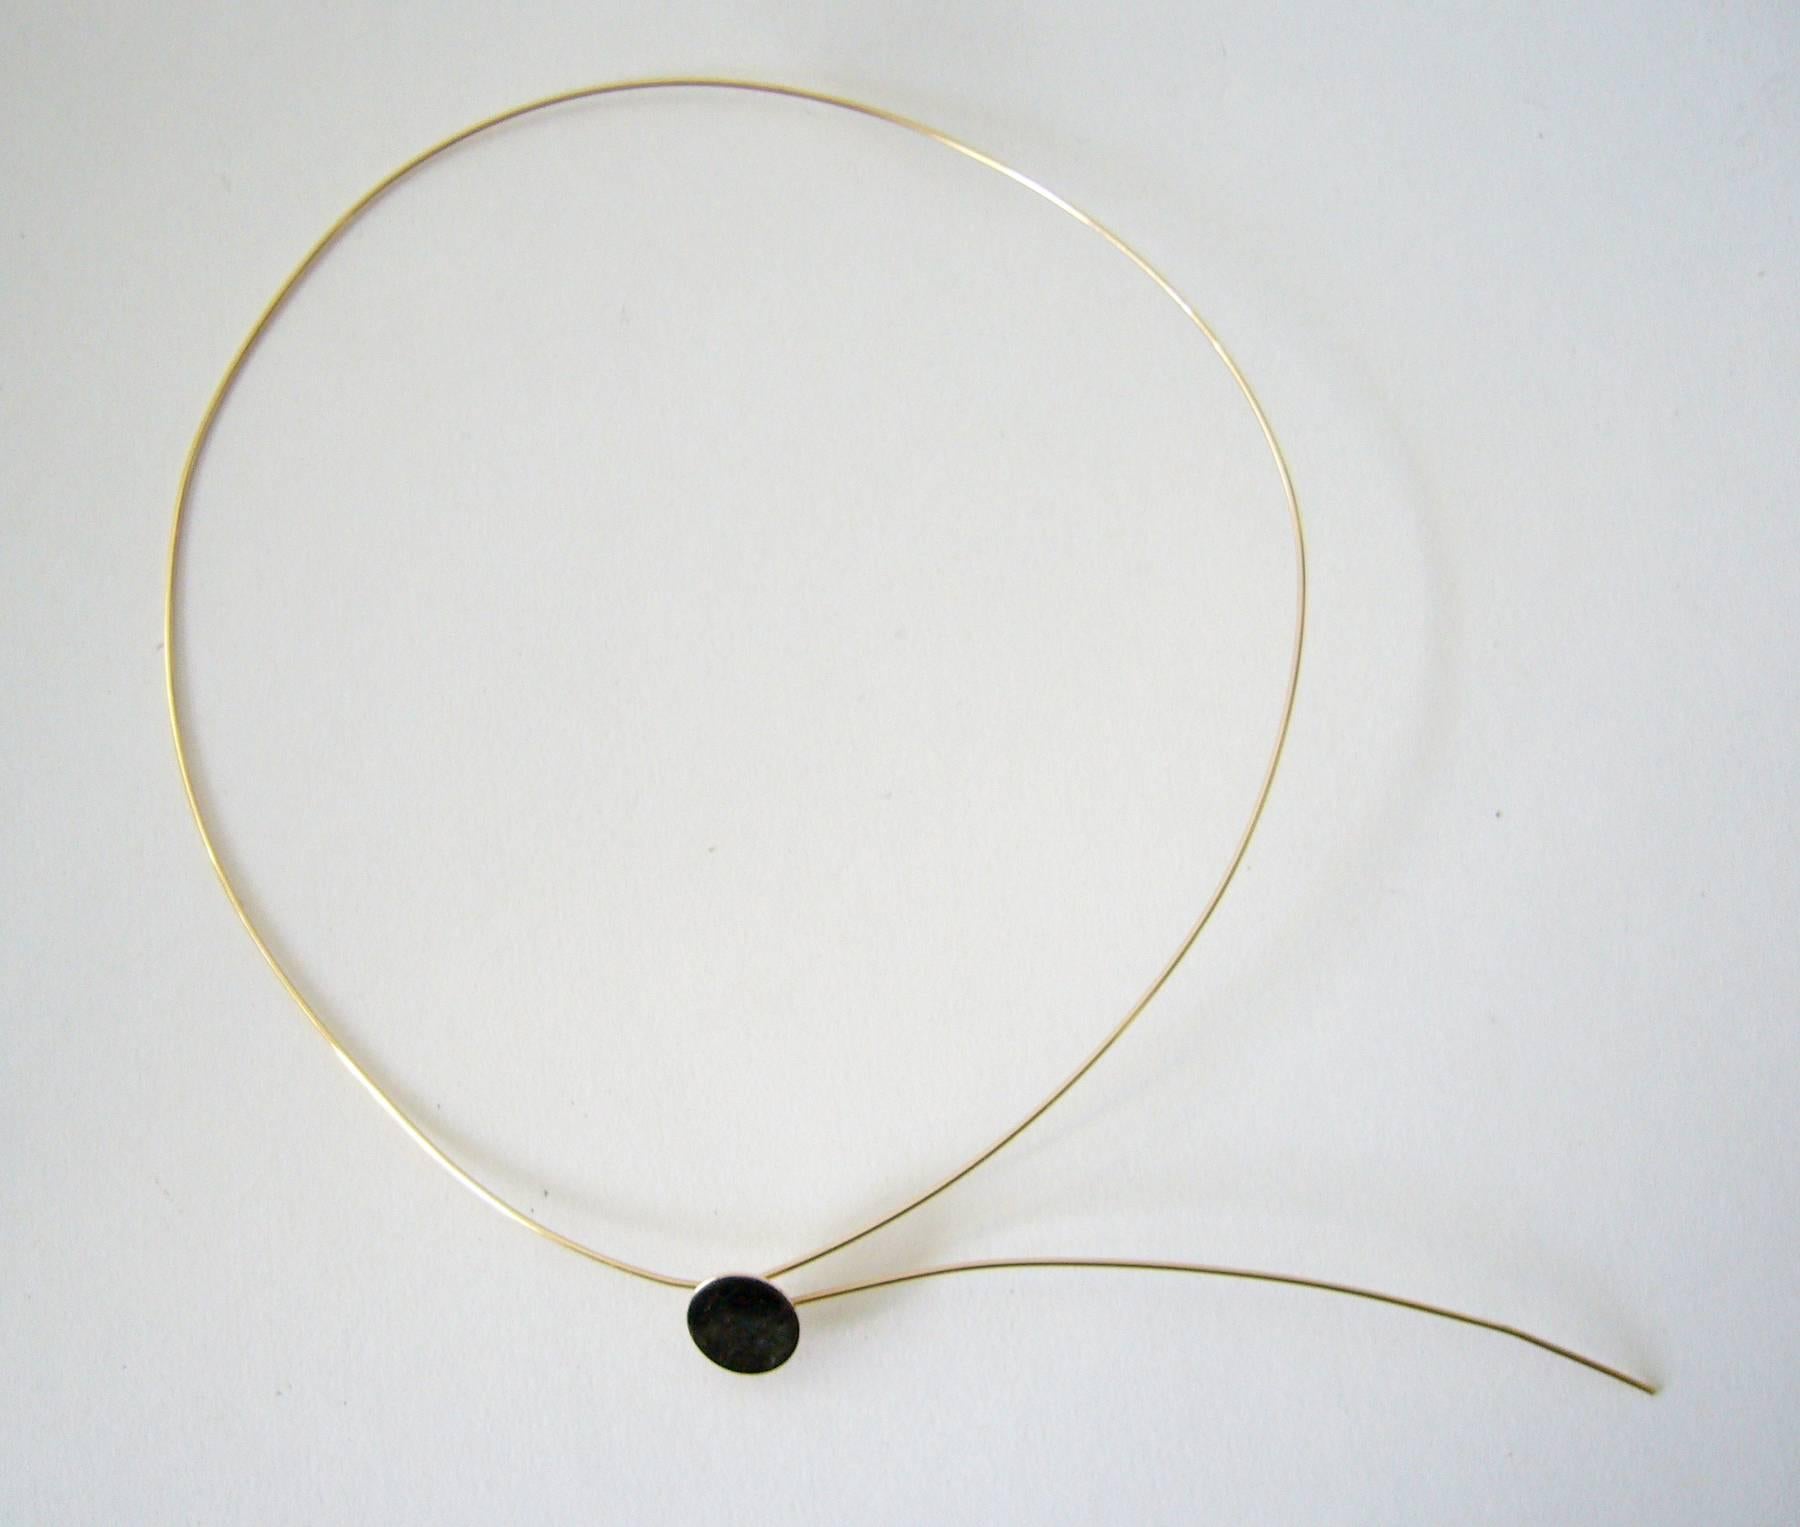 14k gold dot necklace by American modernist jeweler, Betty Cooke of Baltimore, Maryland.  Necklace measures 17